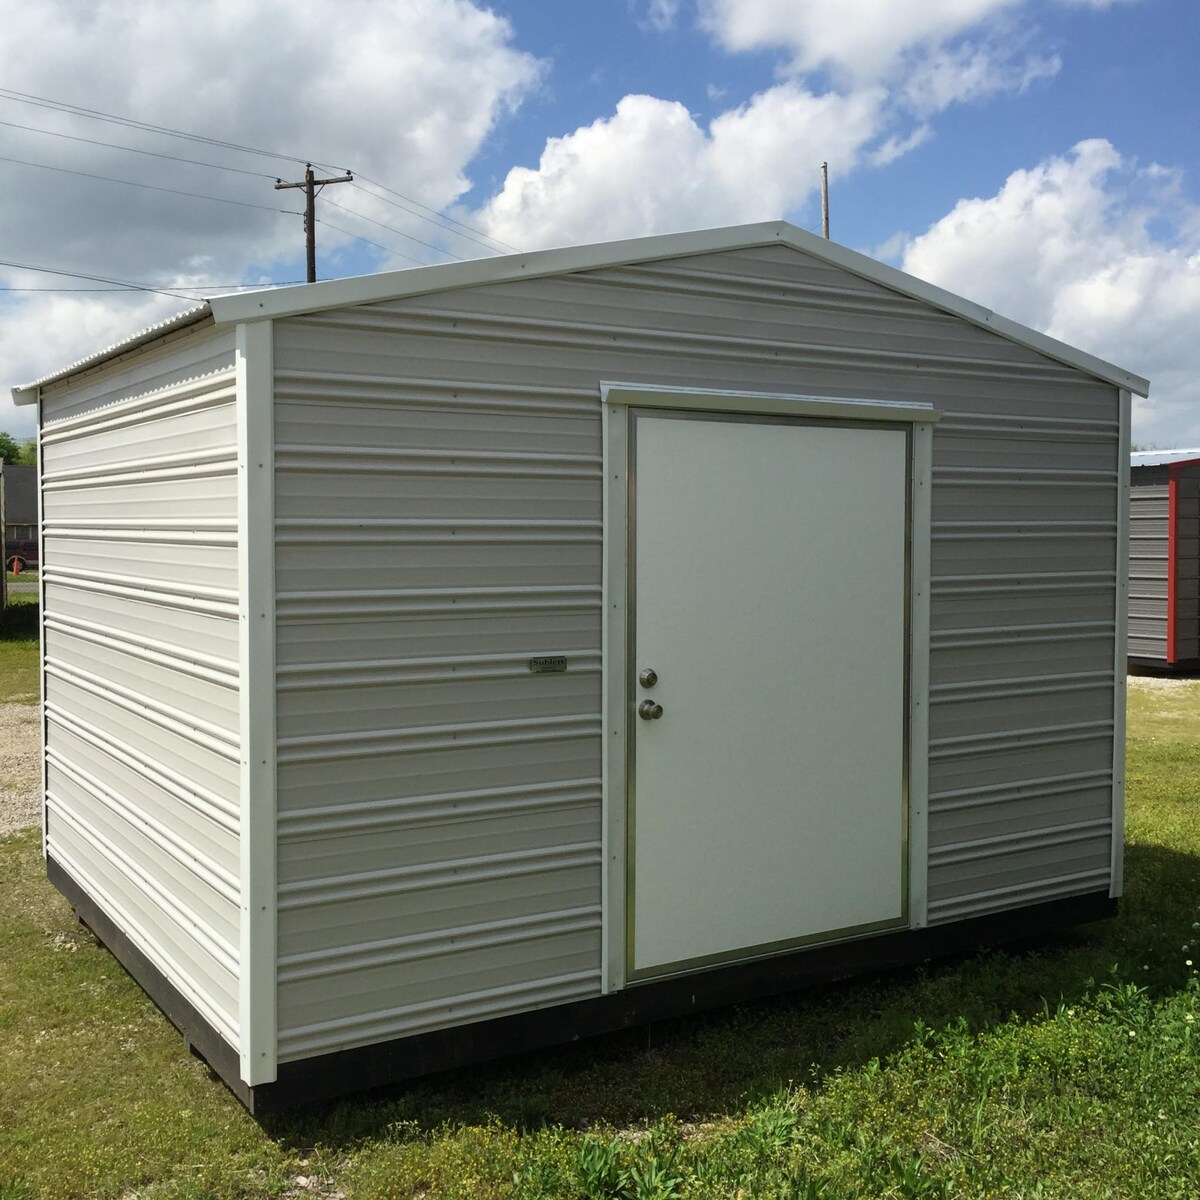 How To Keep A Metal Shed Cool